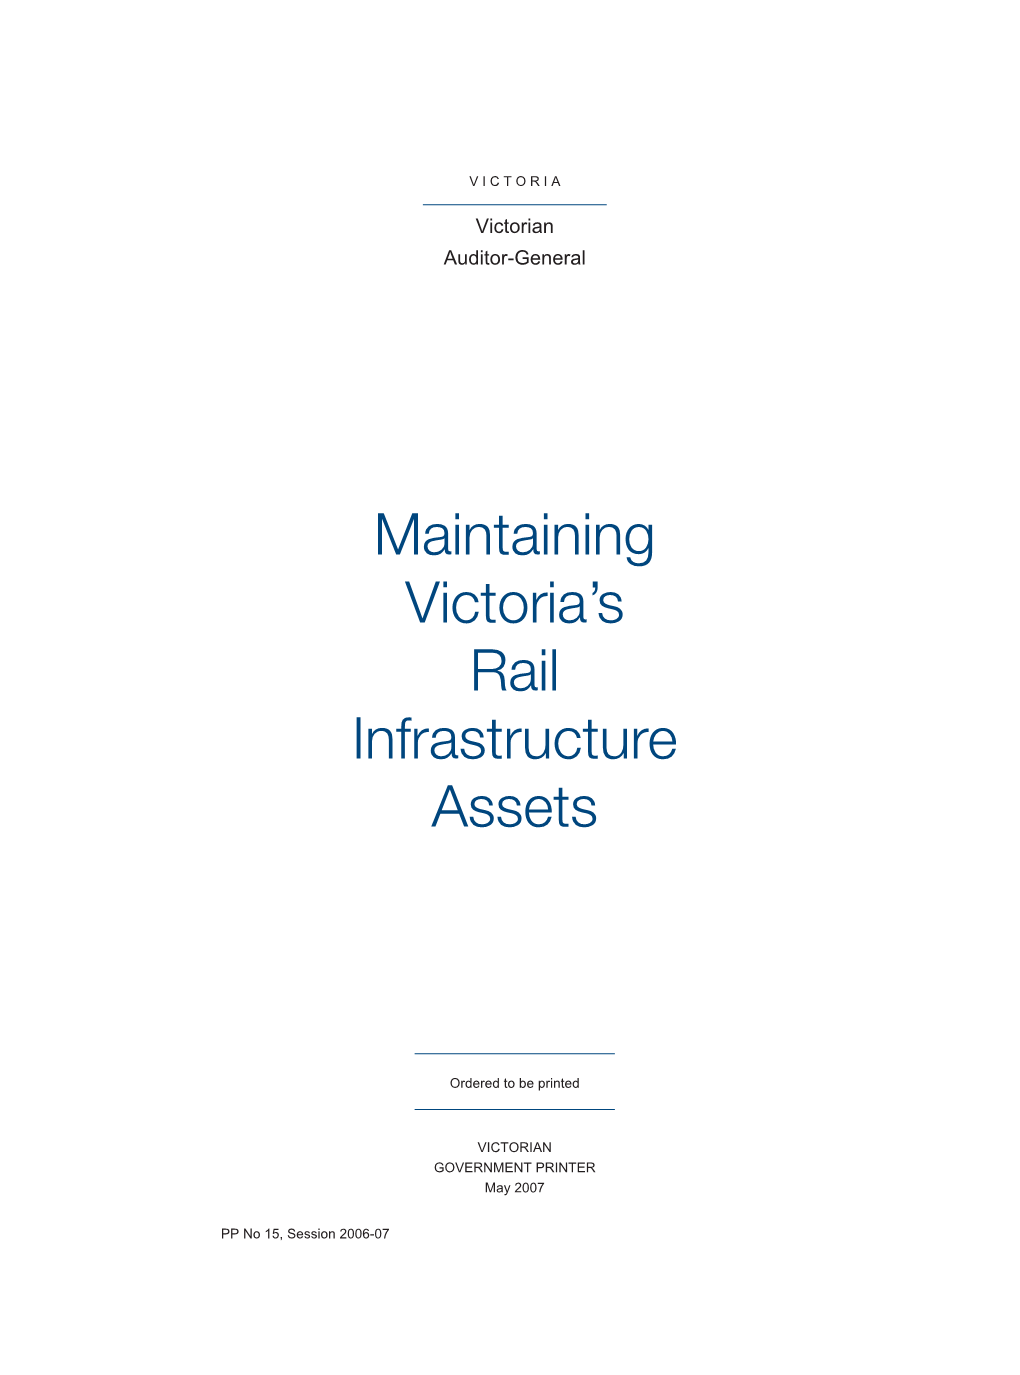 Maintaining Victoria's Rail Infrastructure Assets 1 Executive Summary